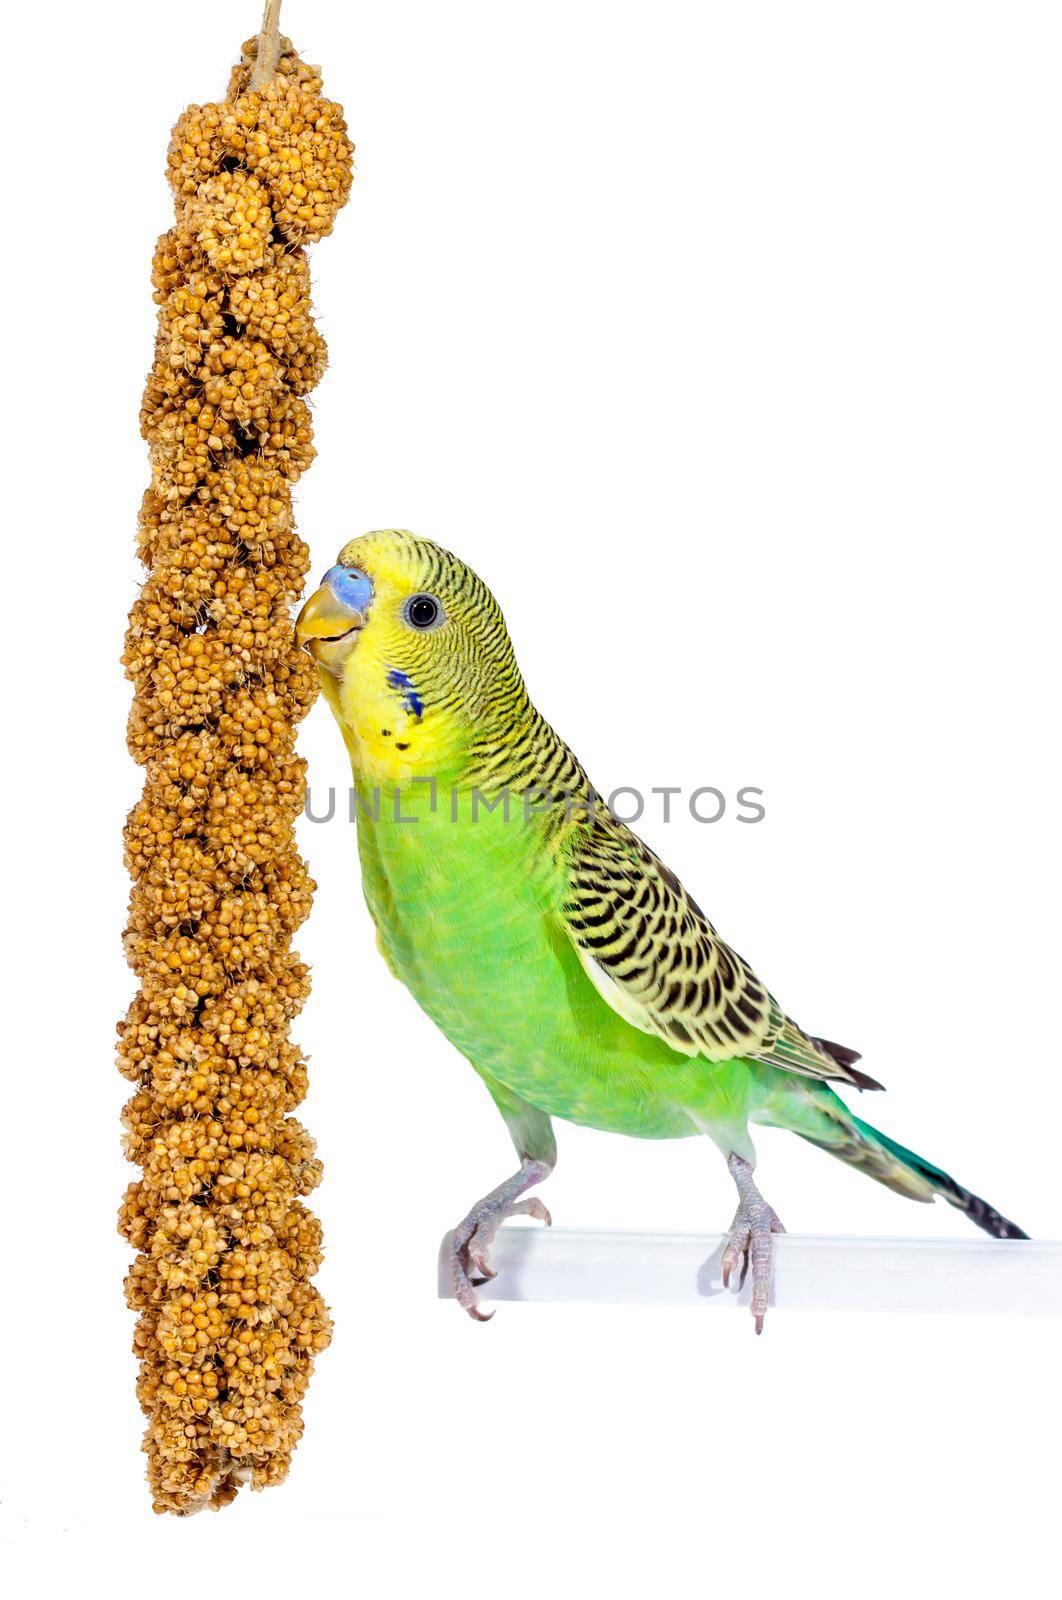 Adorable green baby parrot standing on plastic cage stick, eating delicious food seed bar. Isolated on white background.